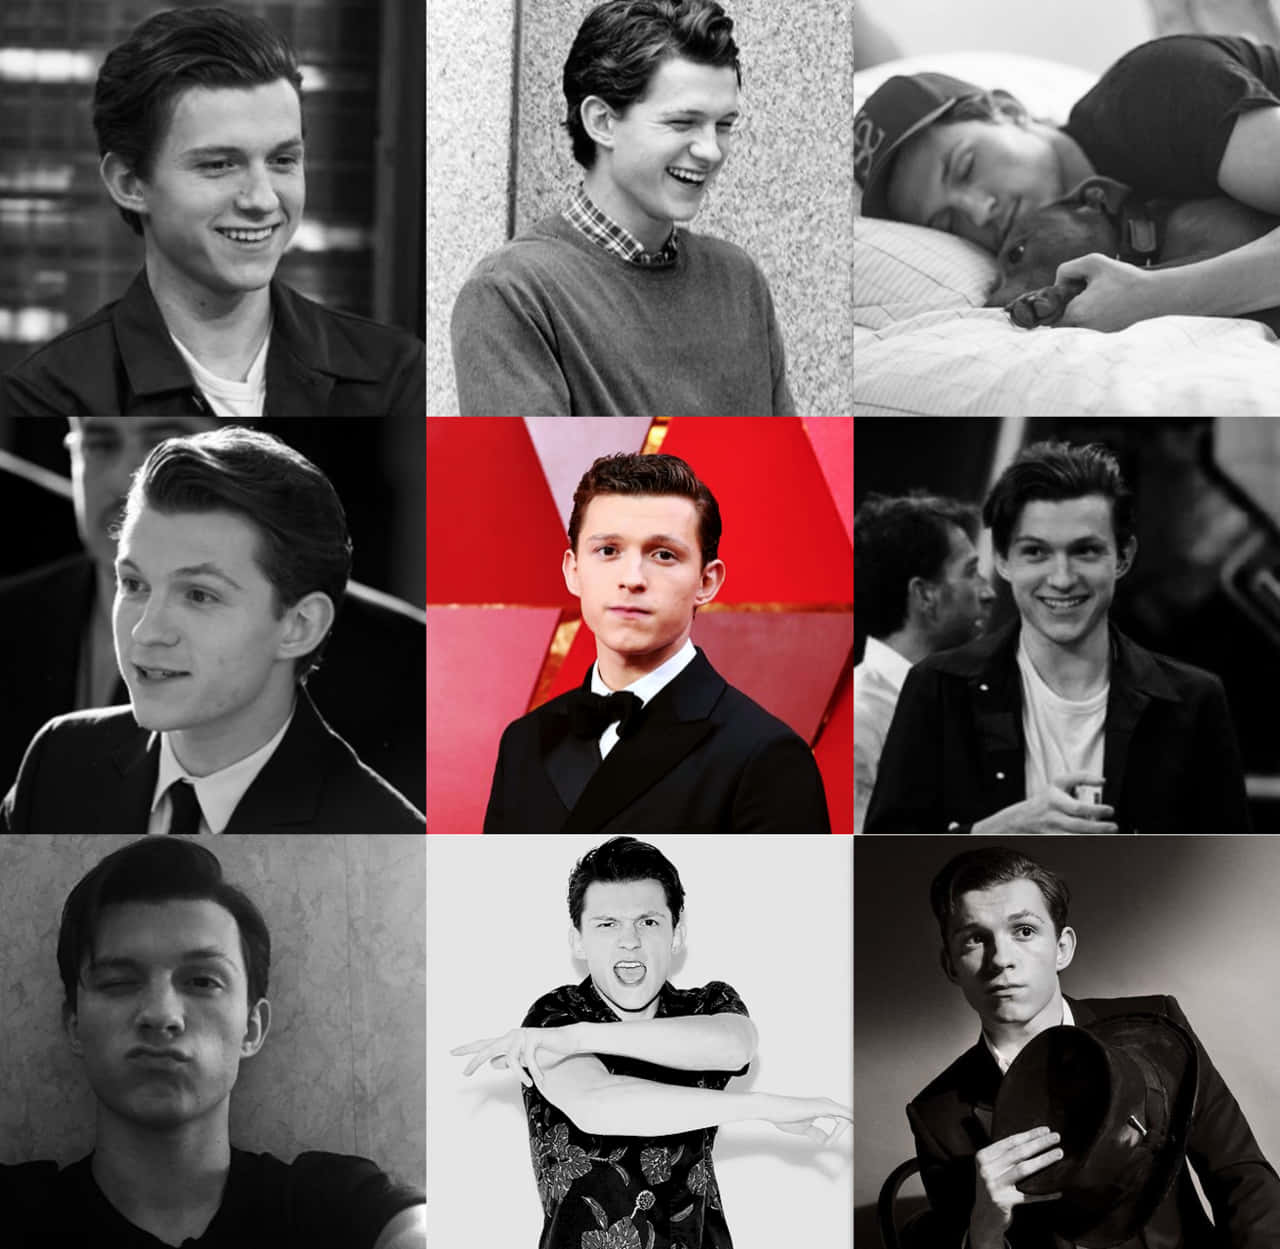 A collage of Tom Holland in different poses and outfits - Tom Holland